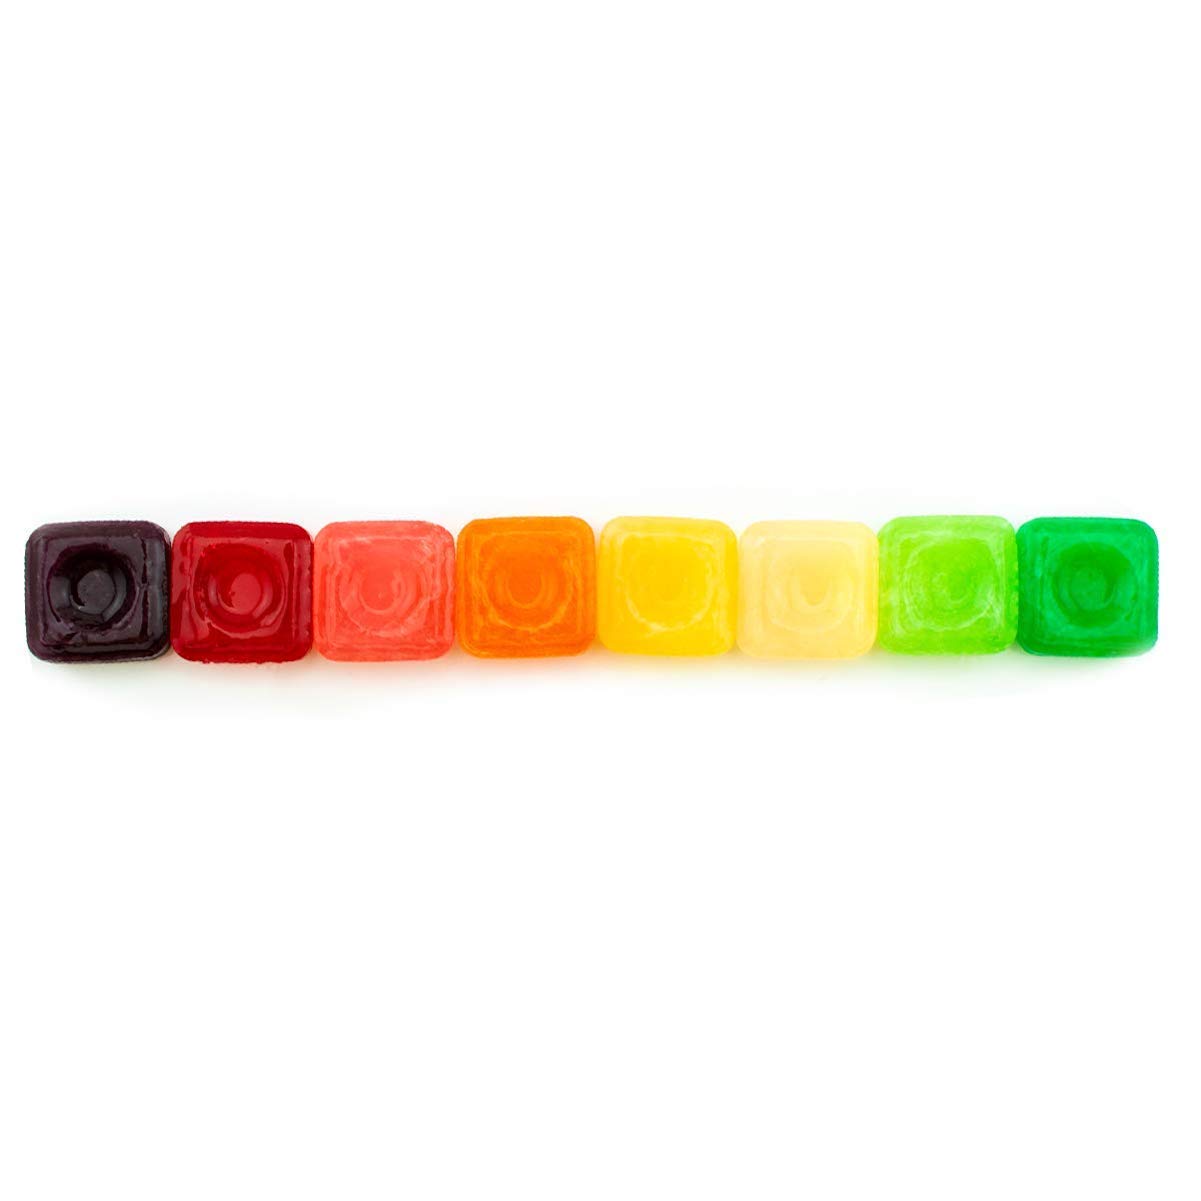  Charms Squares, Assorted Fruit Flavors, Box of 20 Packs